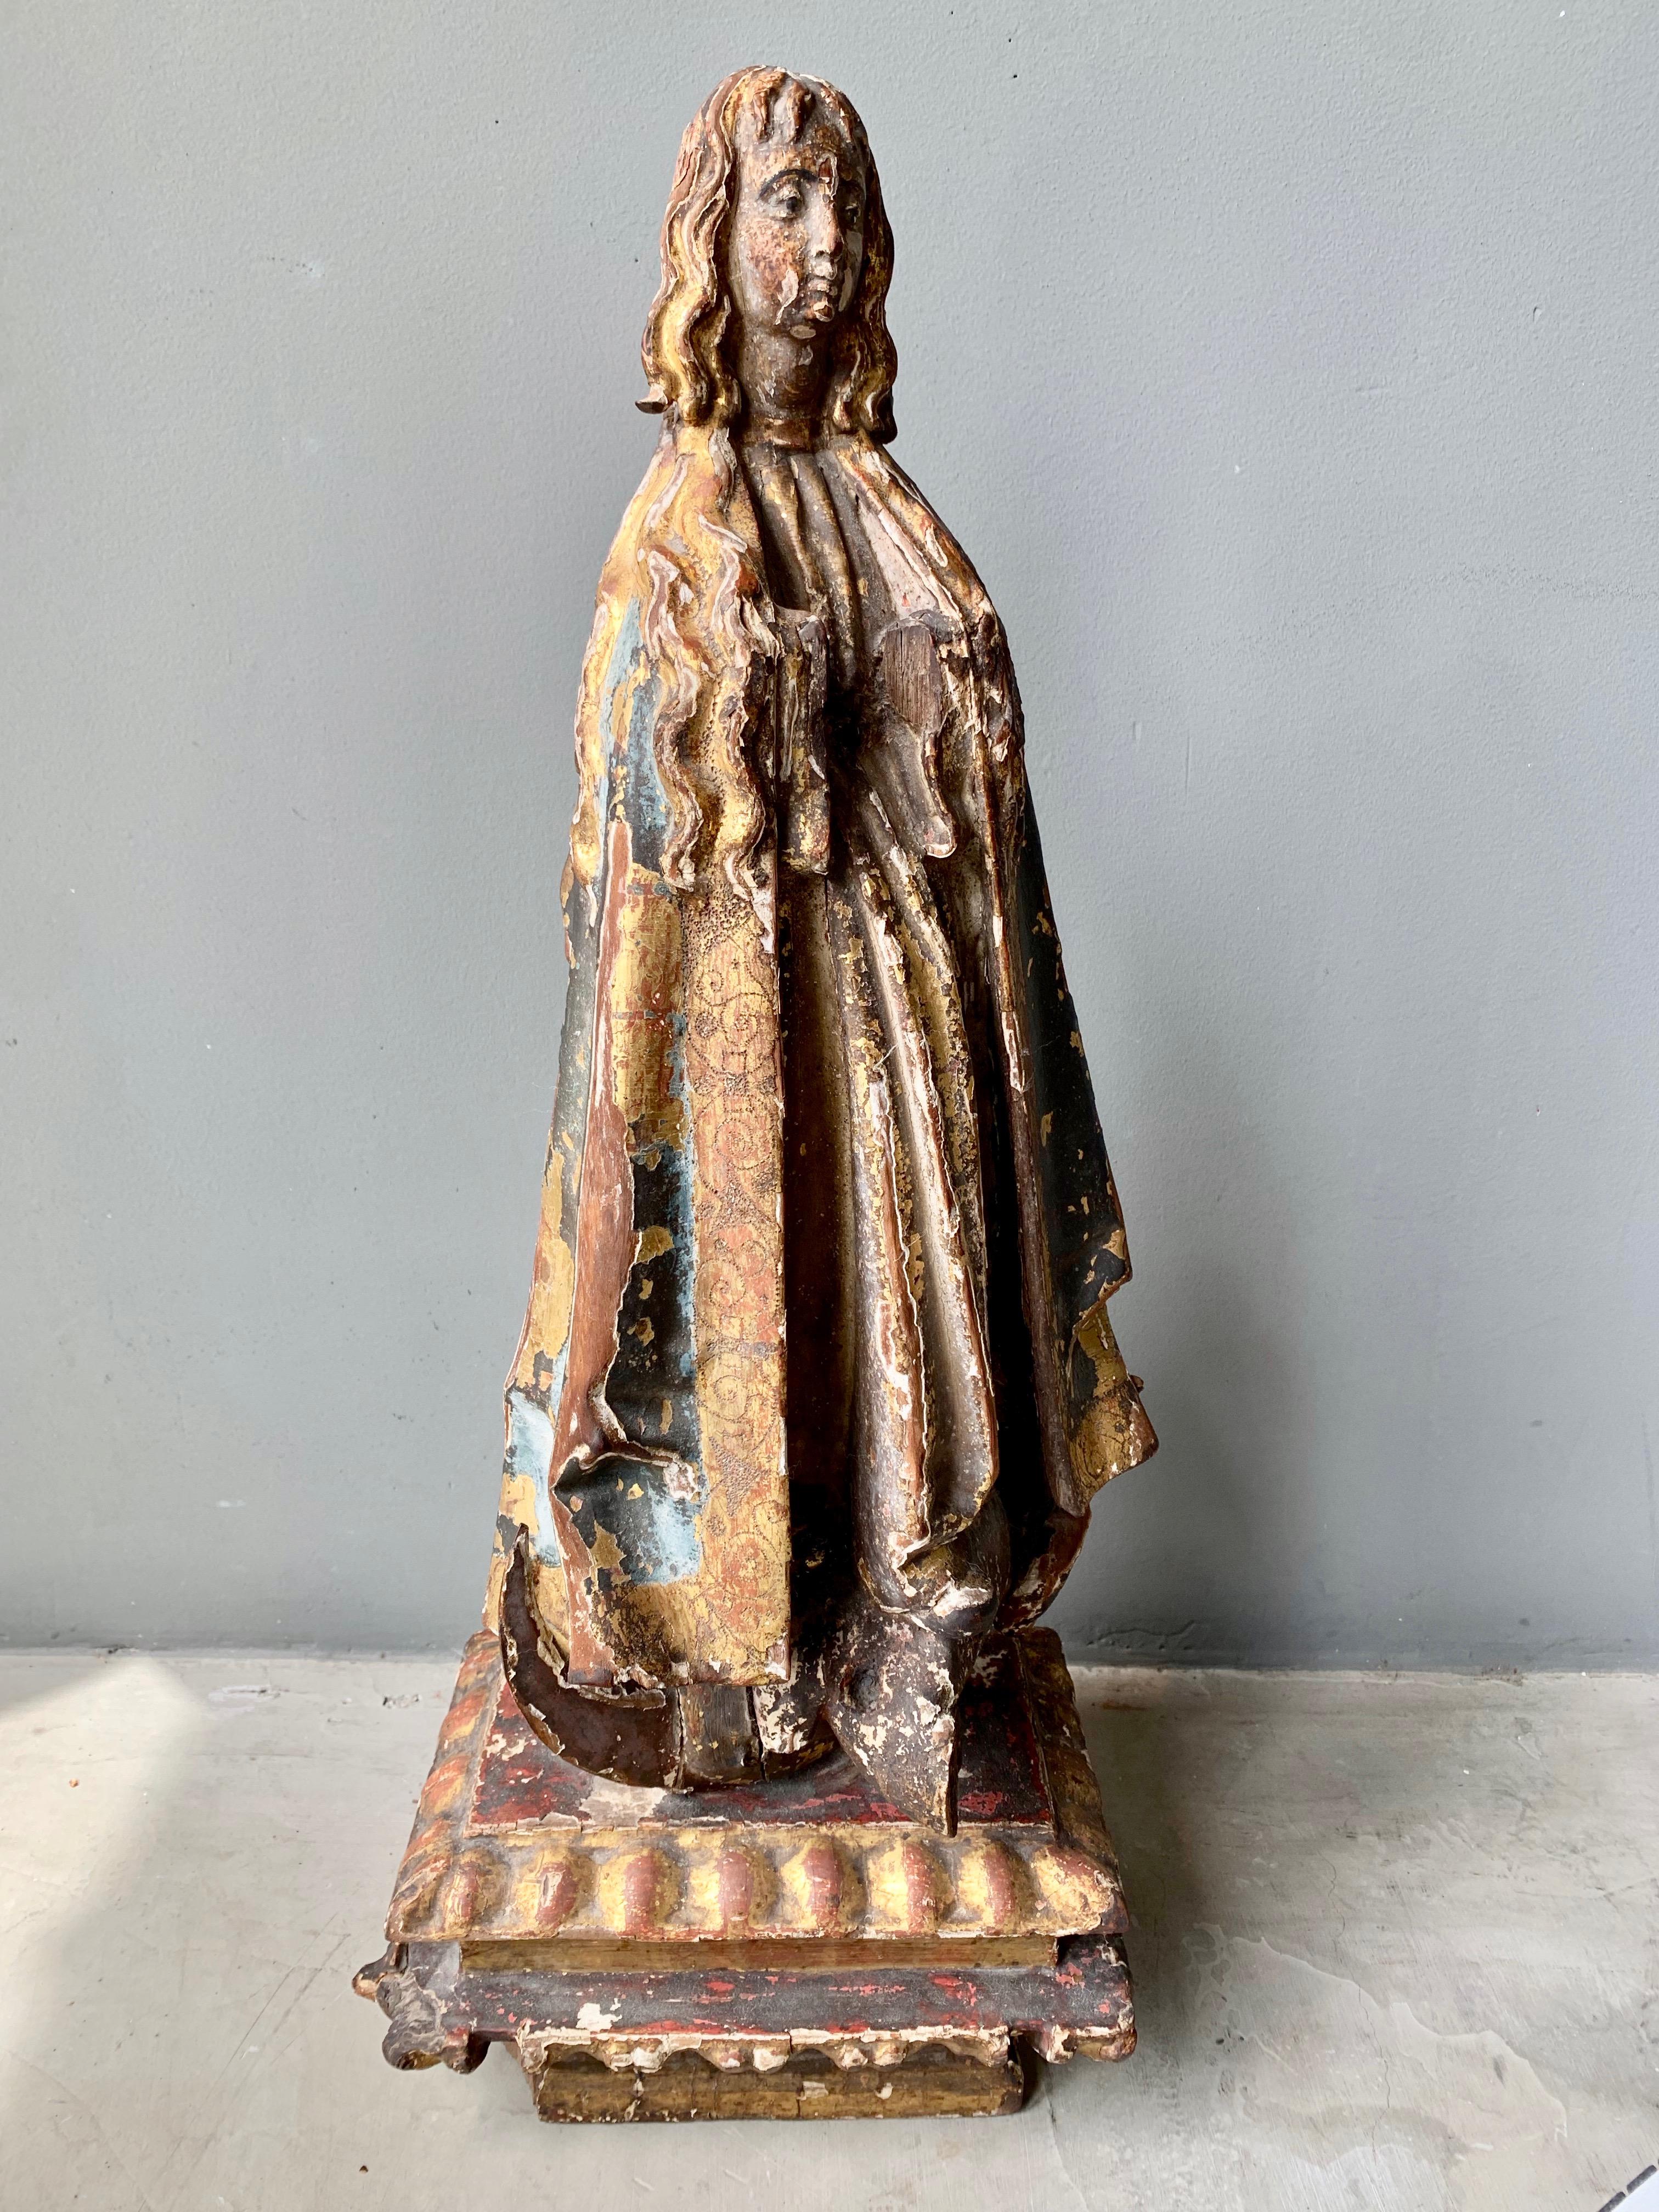 Stunning polychromed wood santo from the early 1700s. Likely from a Roman Catholic Church. Very good condition considering age. Huge amount of presence. Beautiful religious artifact.